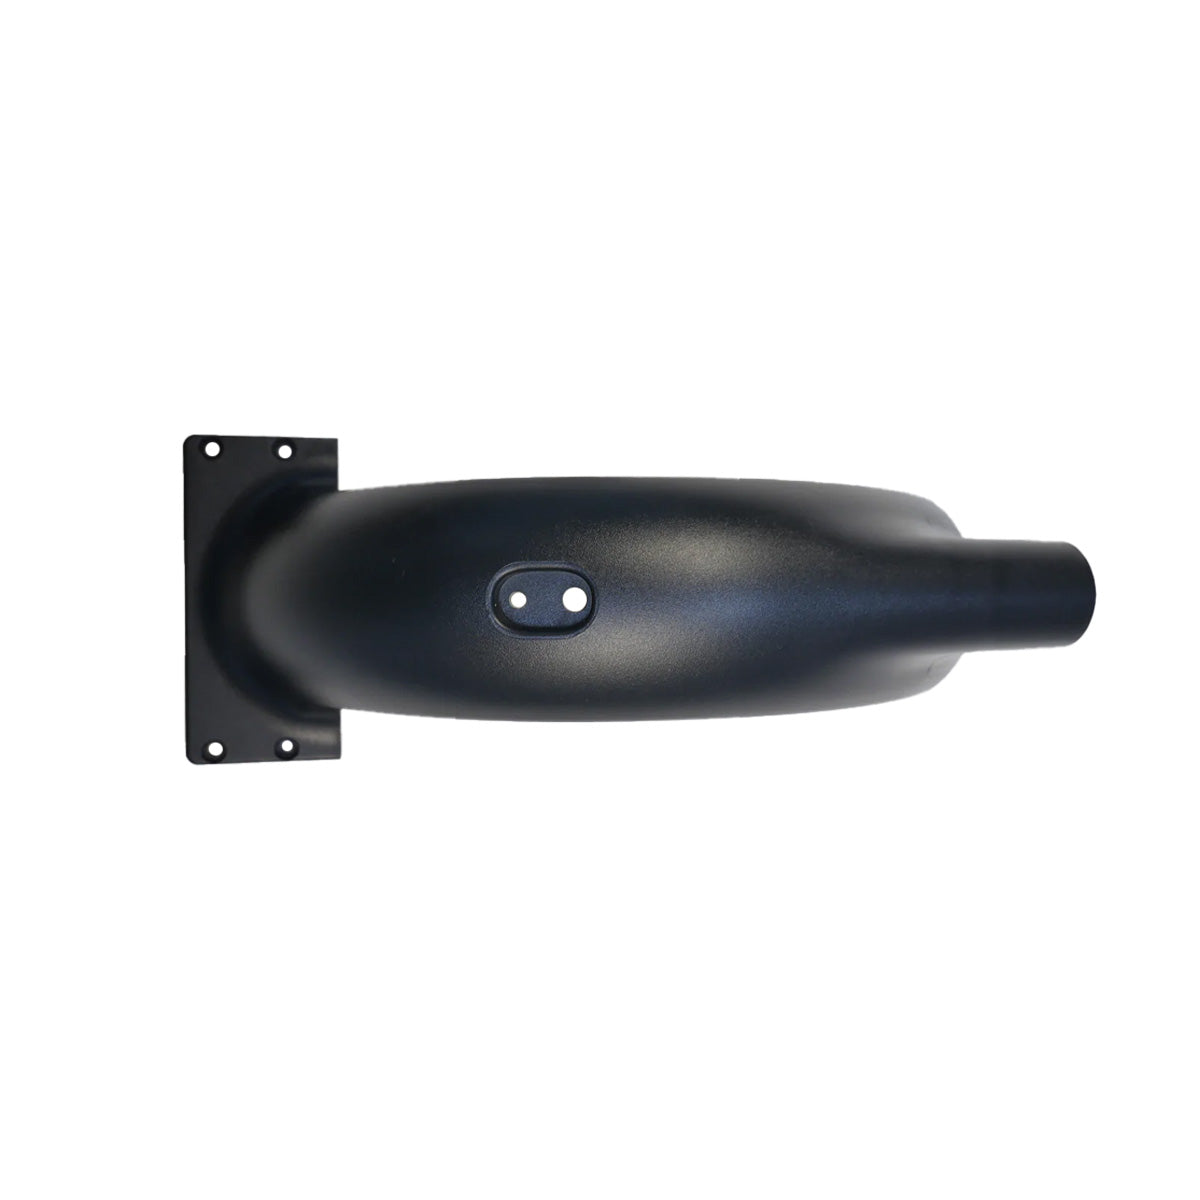 Rear Mudguard - Only fits Pure Air 2nd Gen scooters